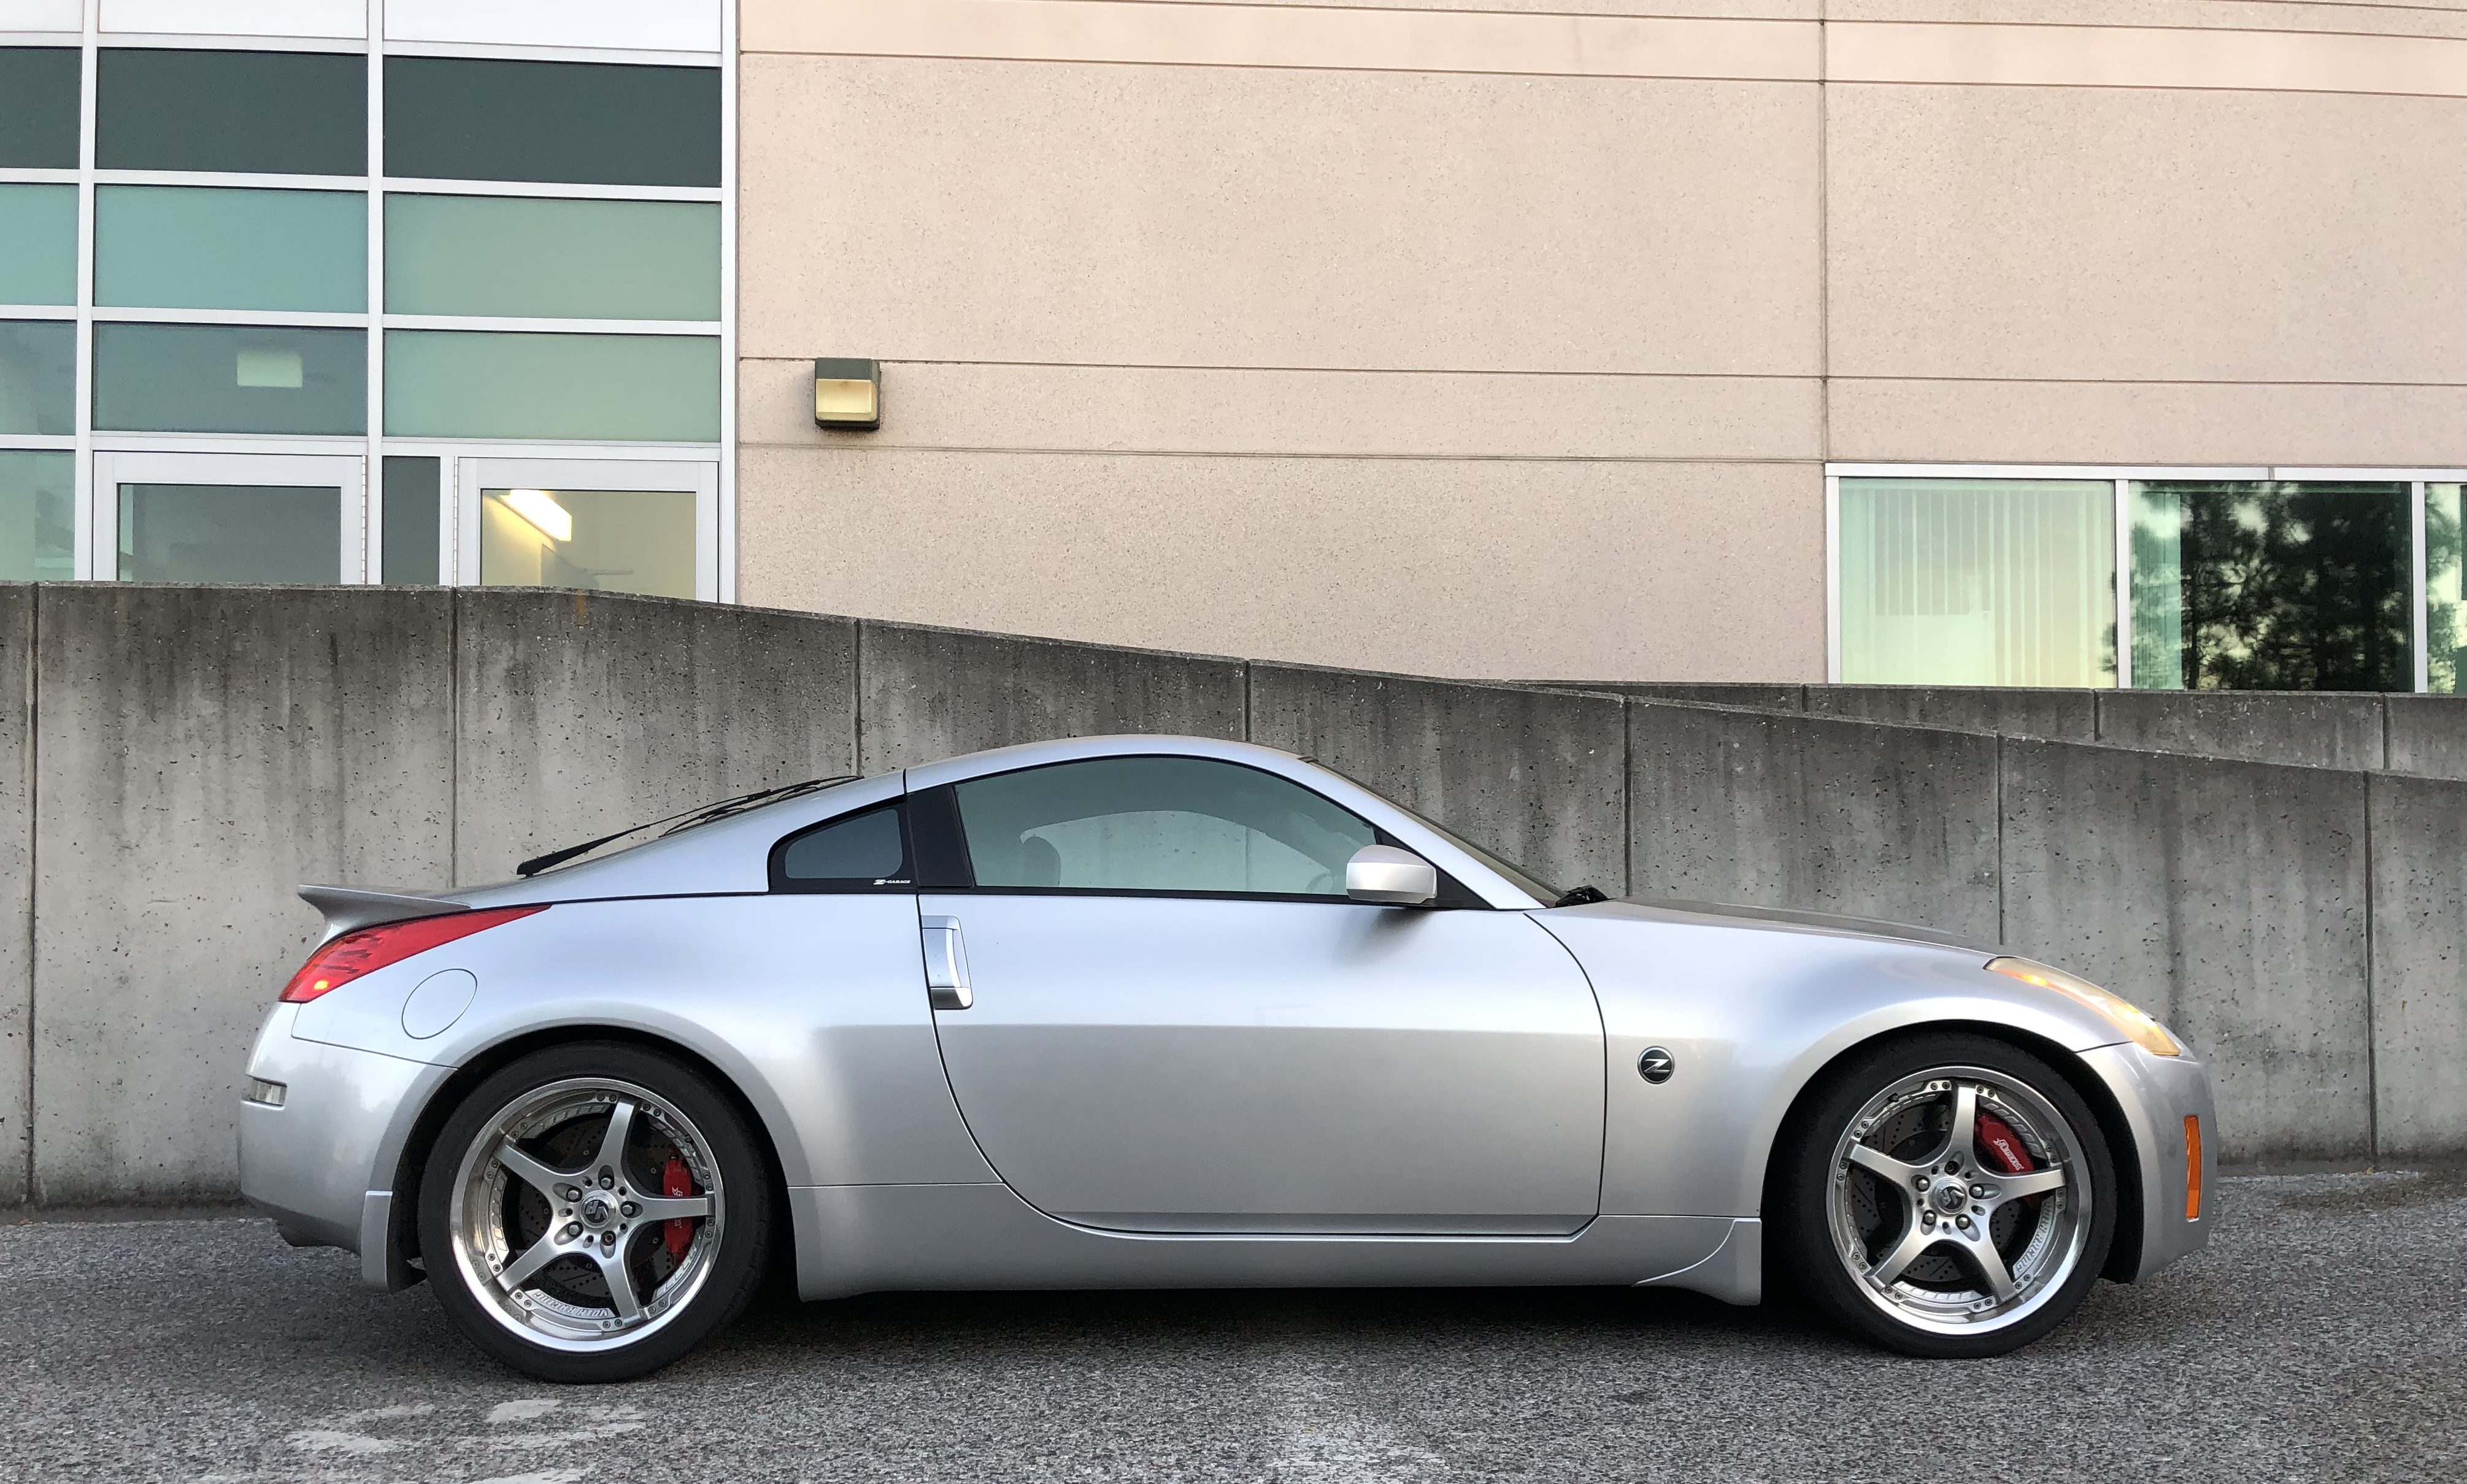 Z-Car Blog » Post Topic » FOR SALE: 2004 Nissan 350Z Touring